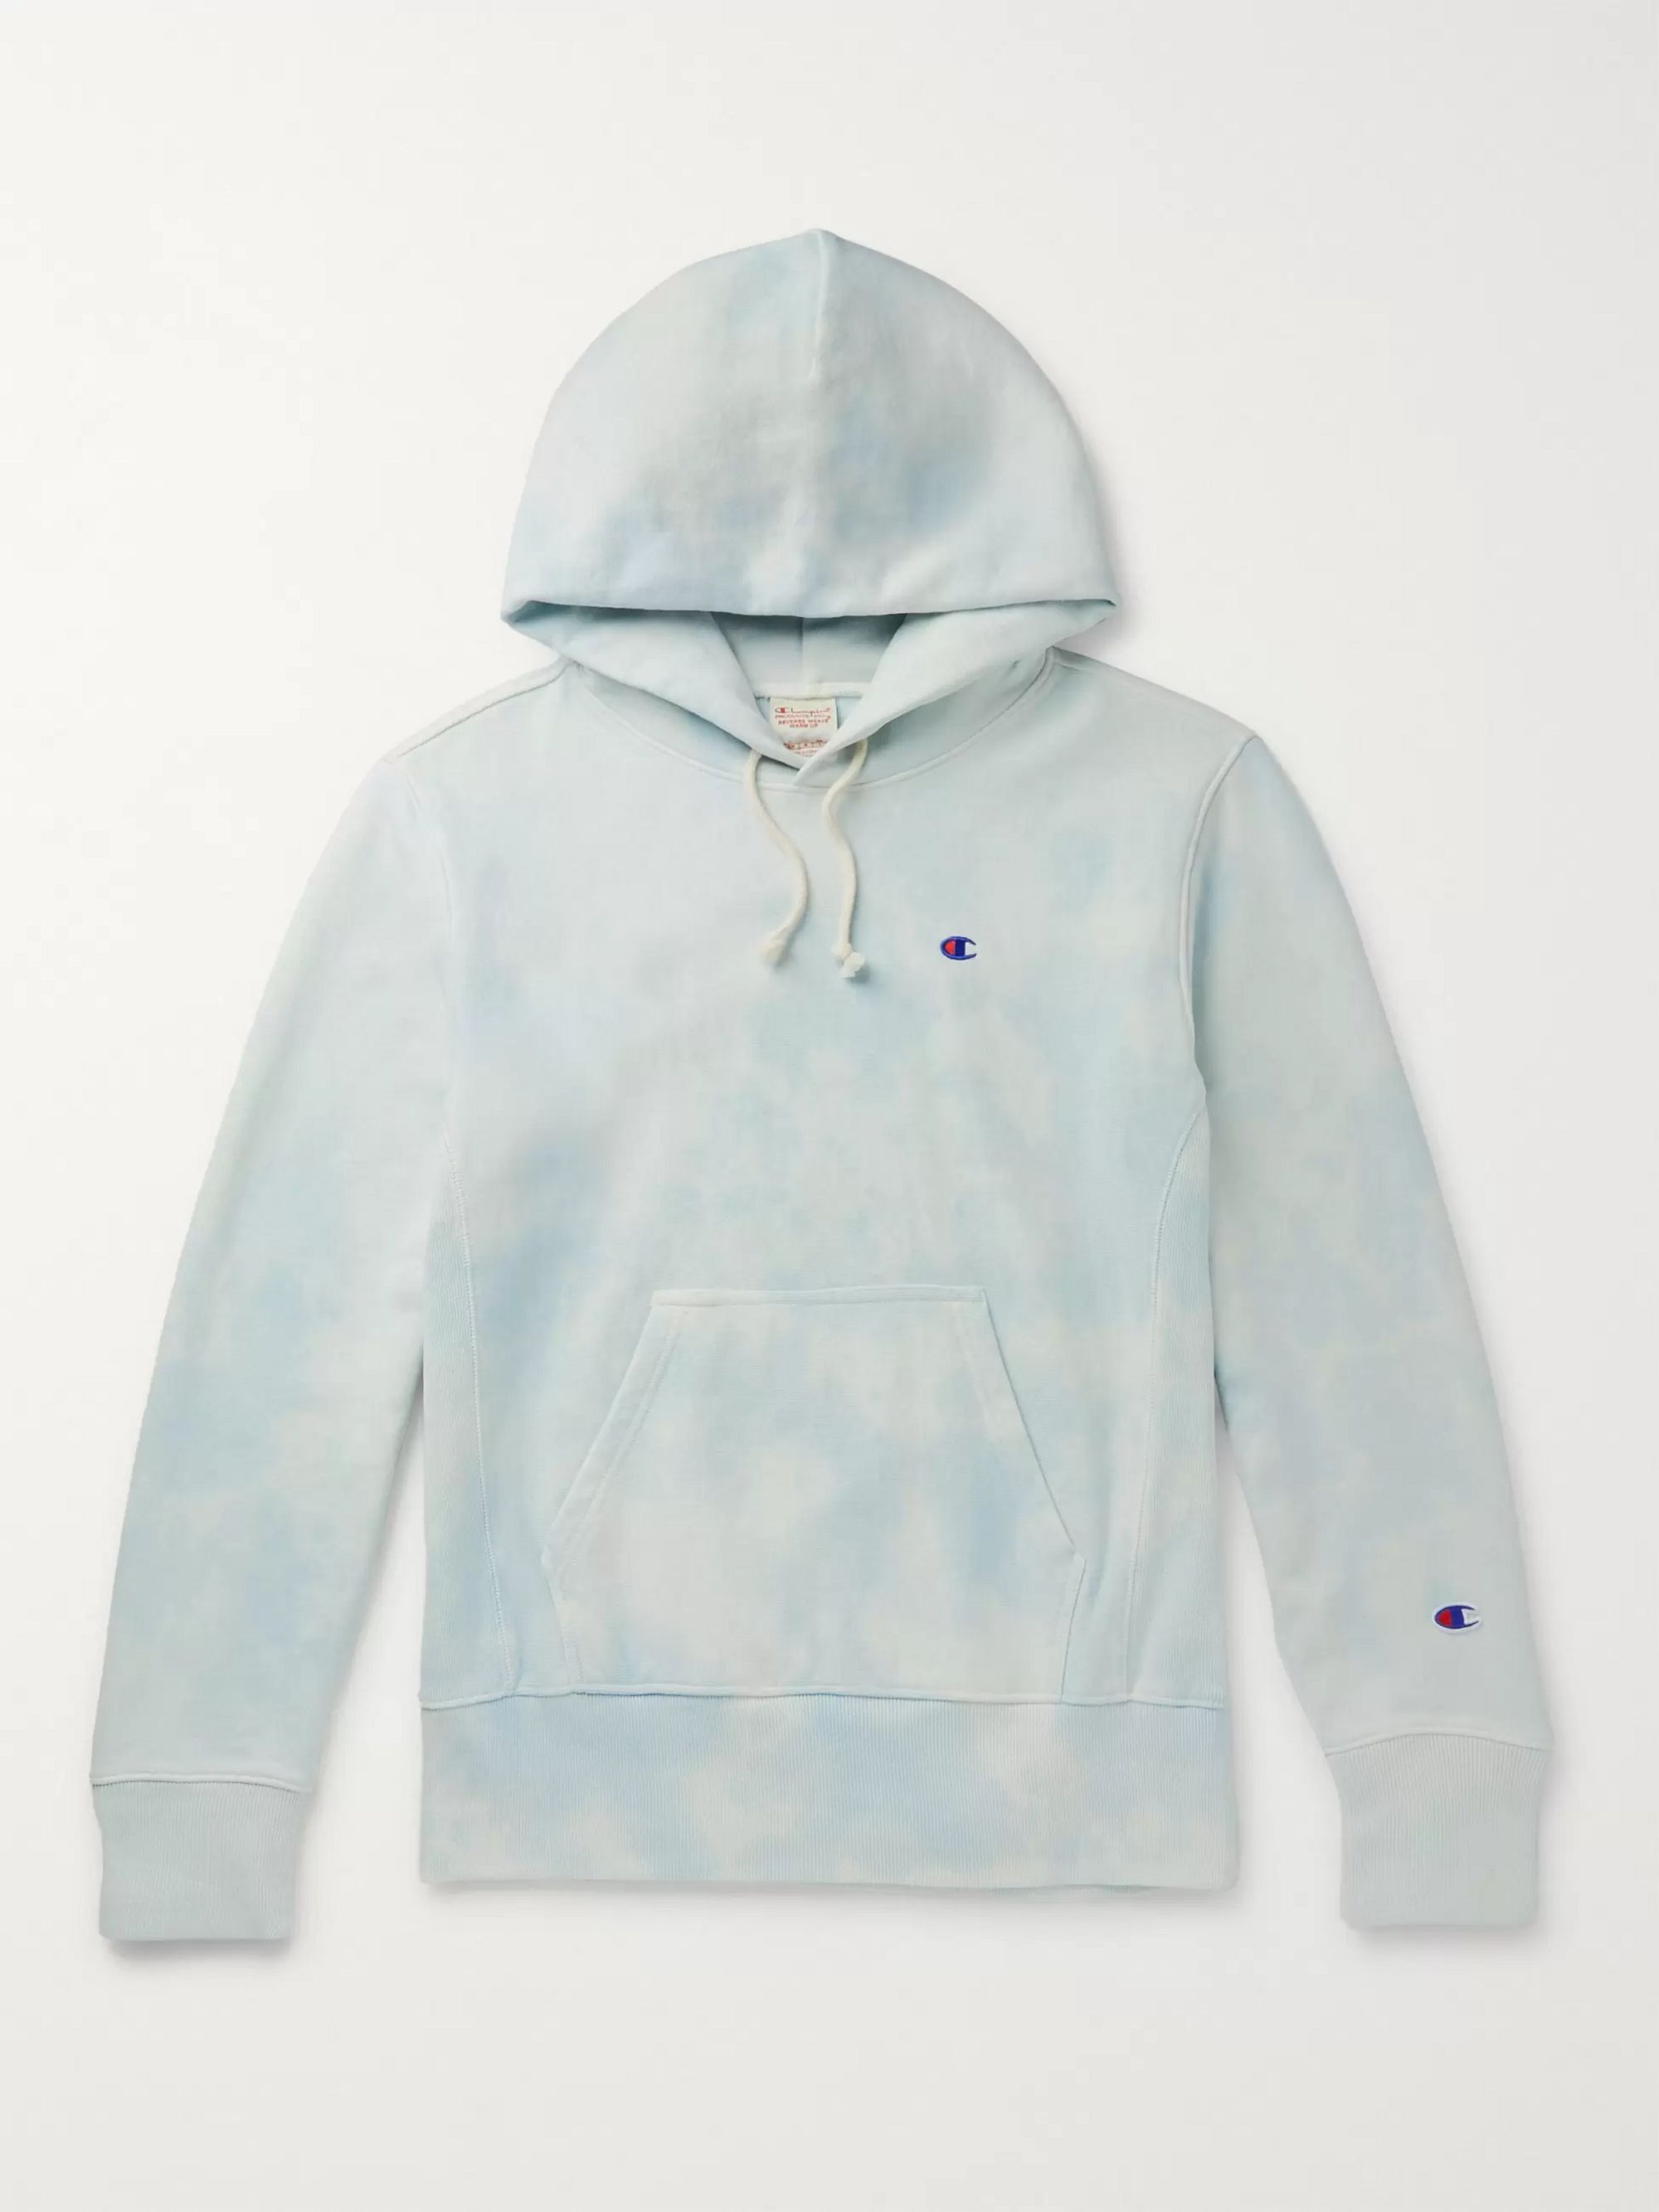 embroidered champion hoodie